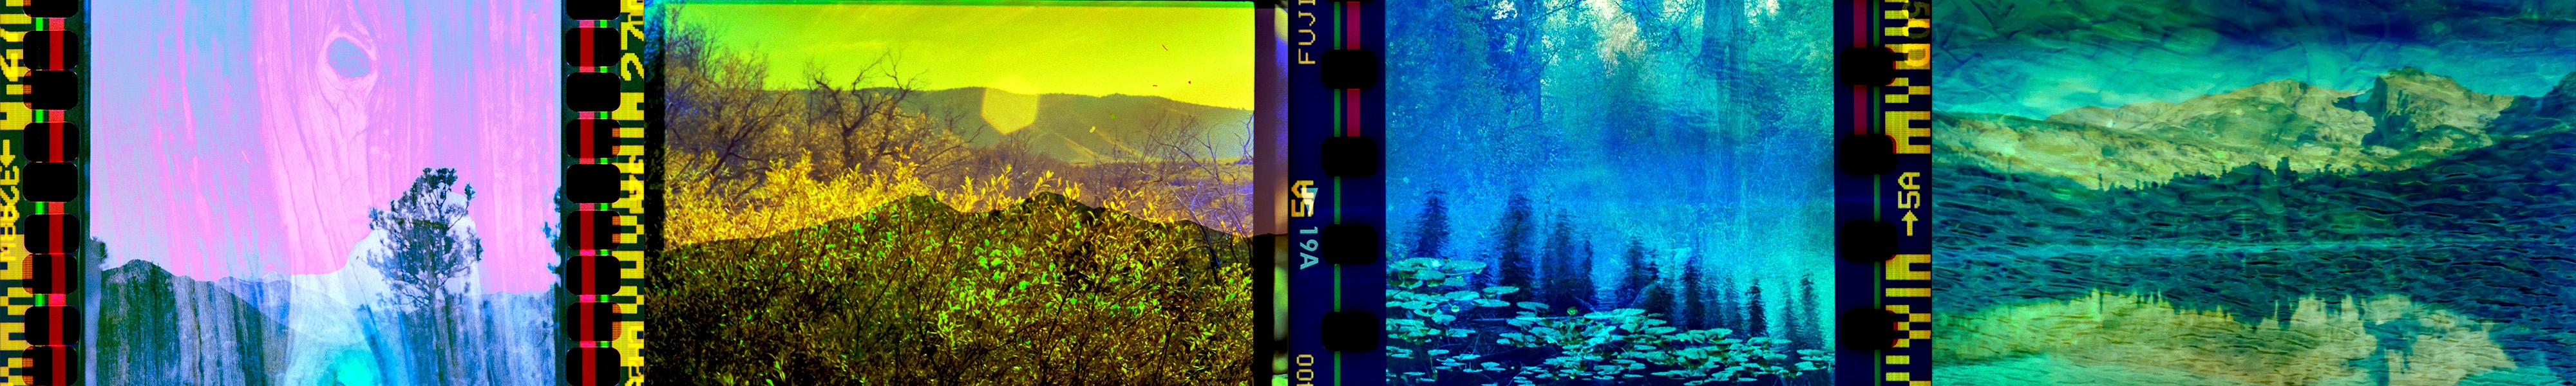 2xExposed-Analog Vol2 banner